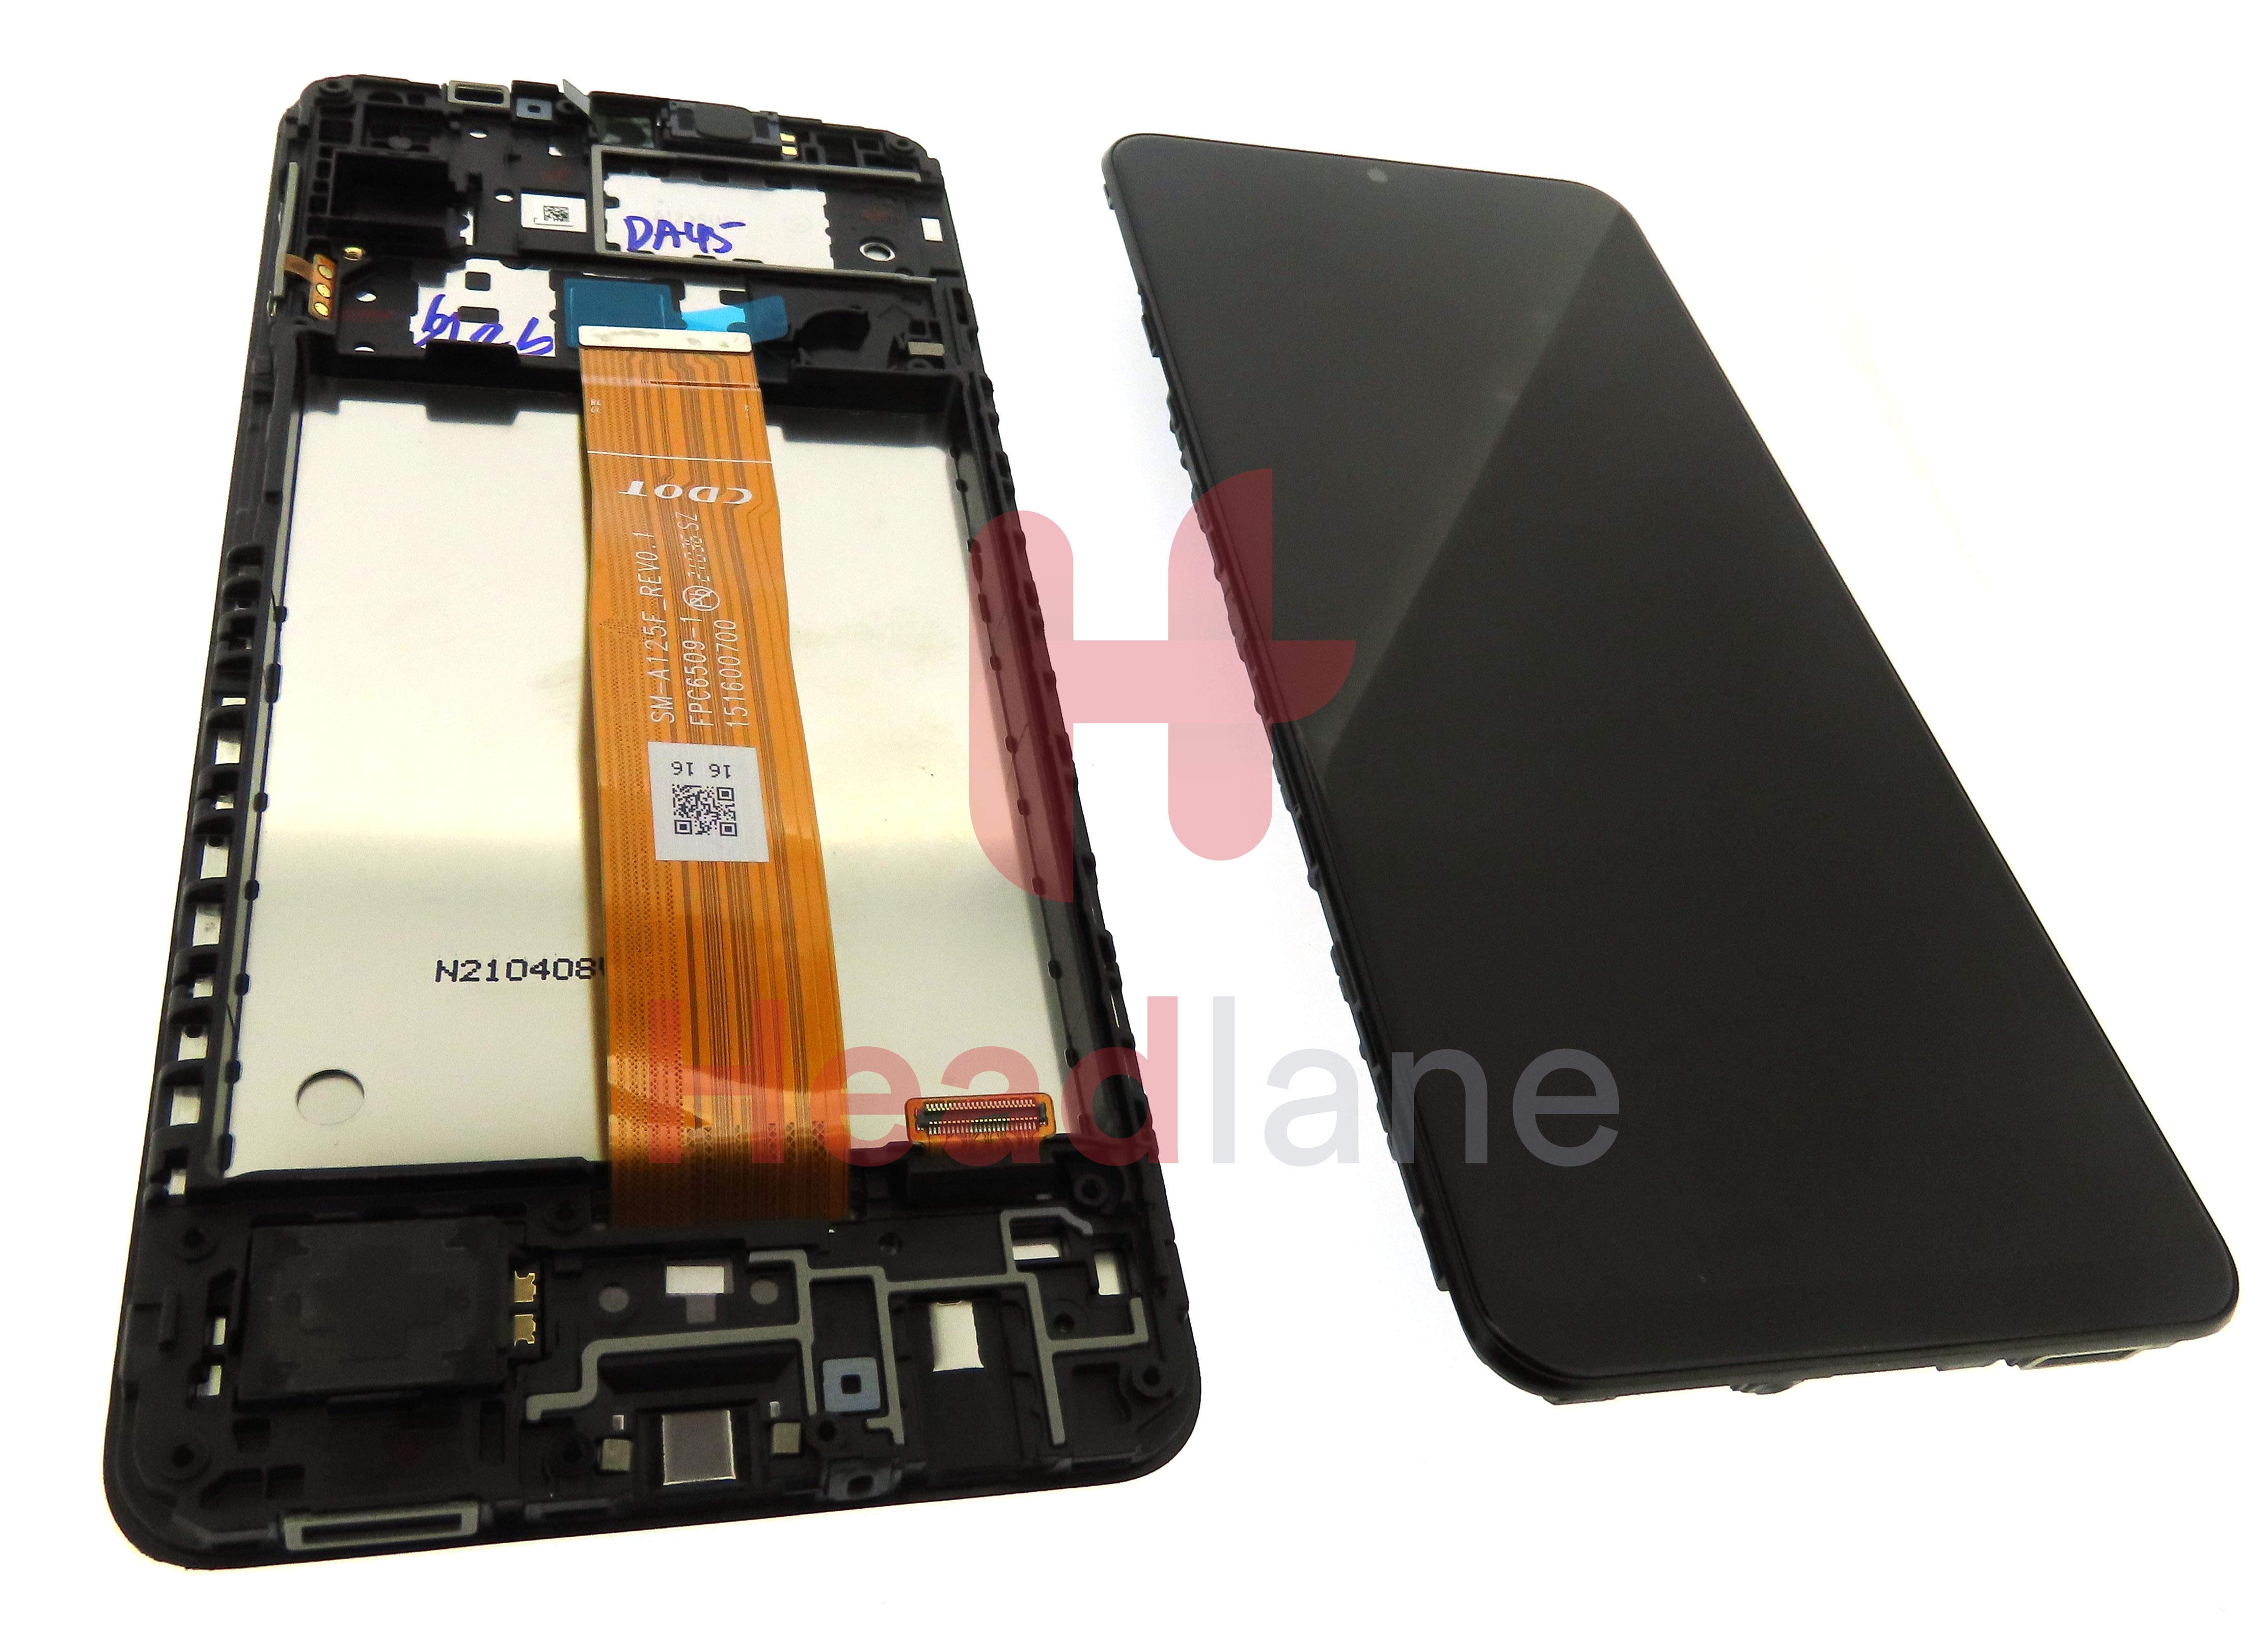 Samsung SM-A125 Galaxy A12 LCD Display / Screen + Touch